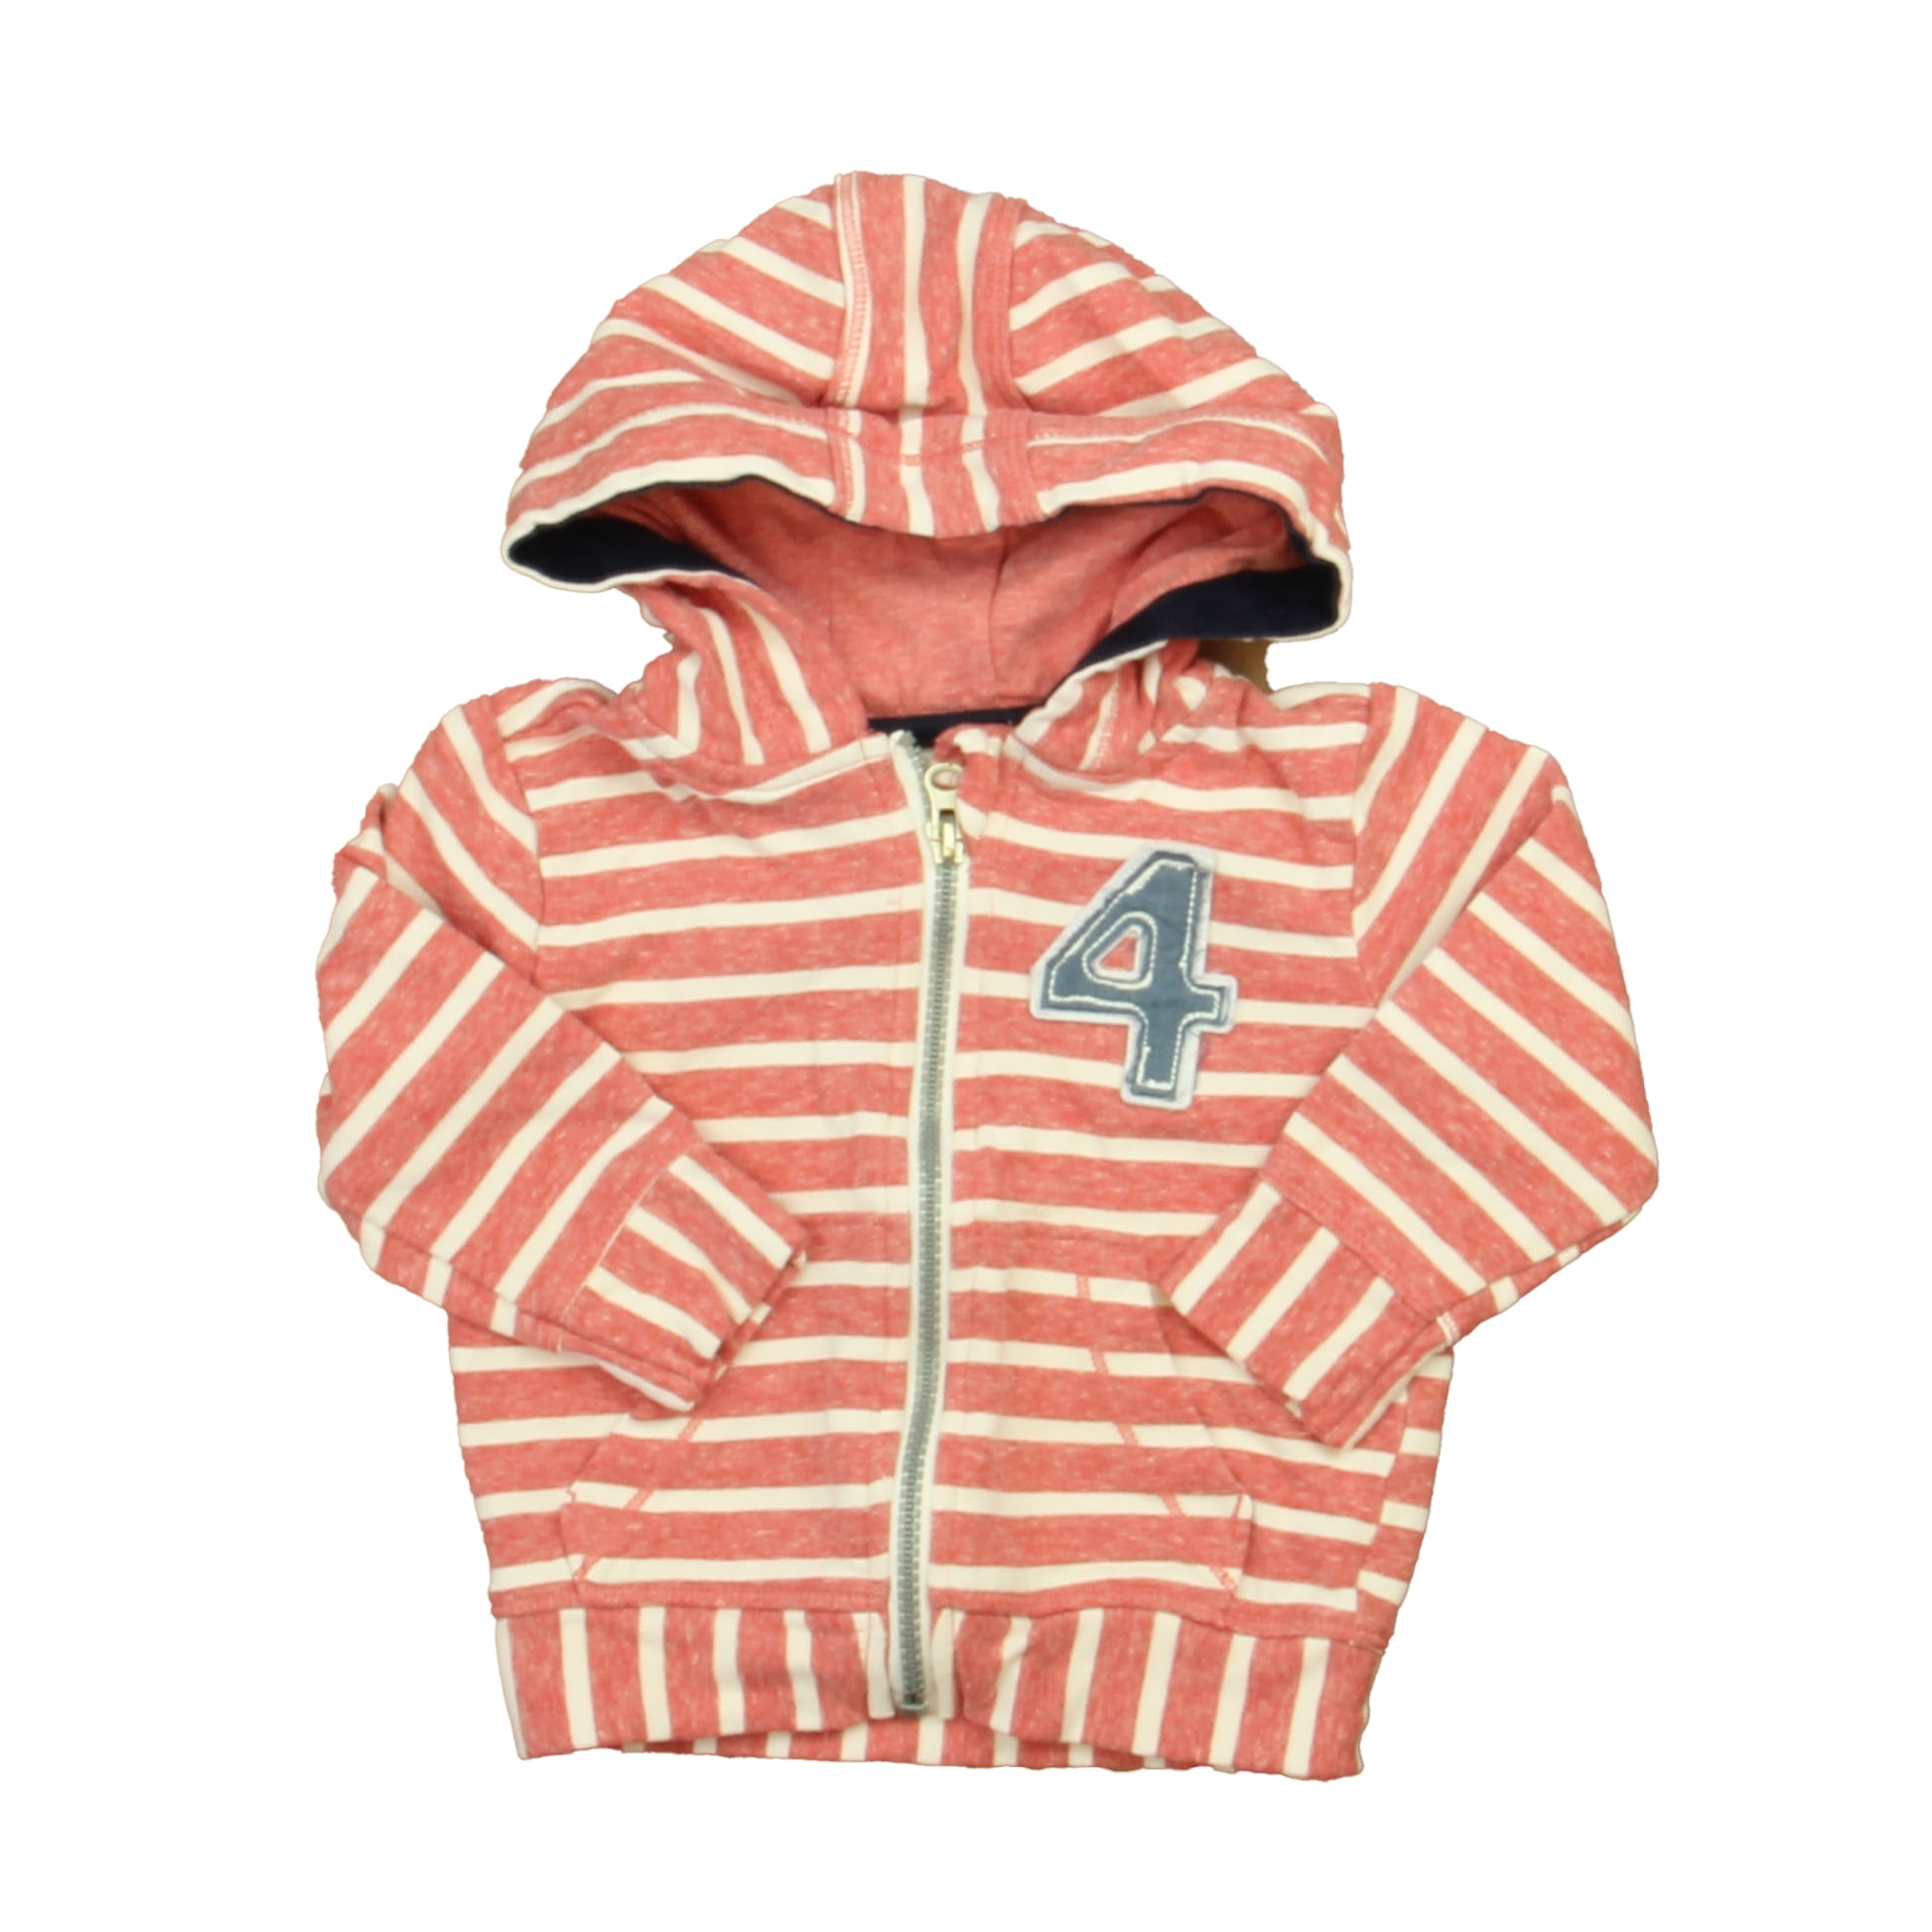 Pre-owned Topomini Boys Red Stripe Hoodie size: 18-24 Months 